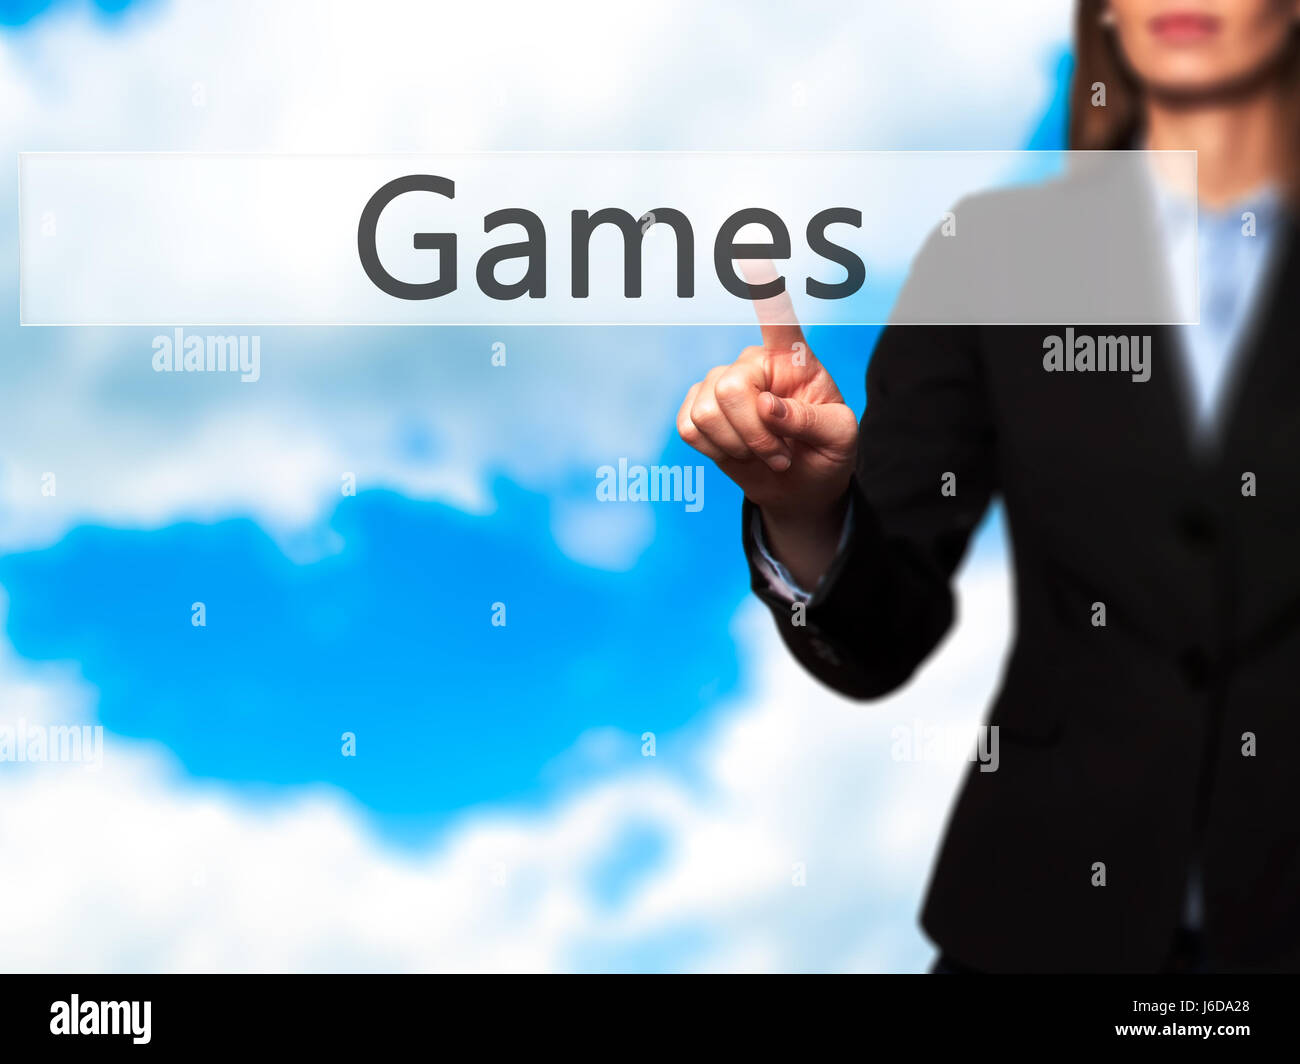 Games - Businesswoman hand pressing button on touch screen interface. Business, technology, internet concept. Stock Photo Stock Photo